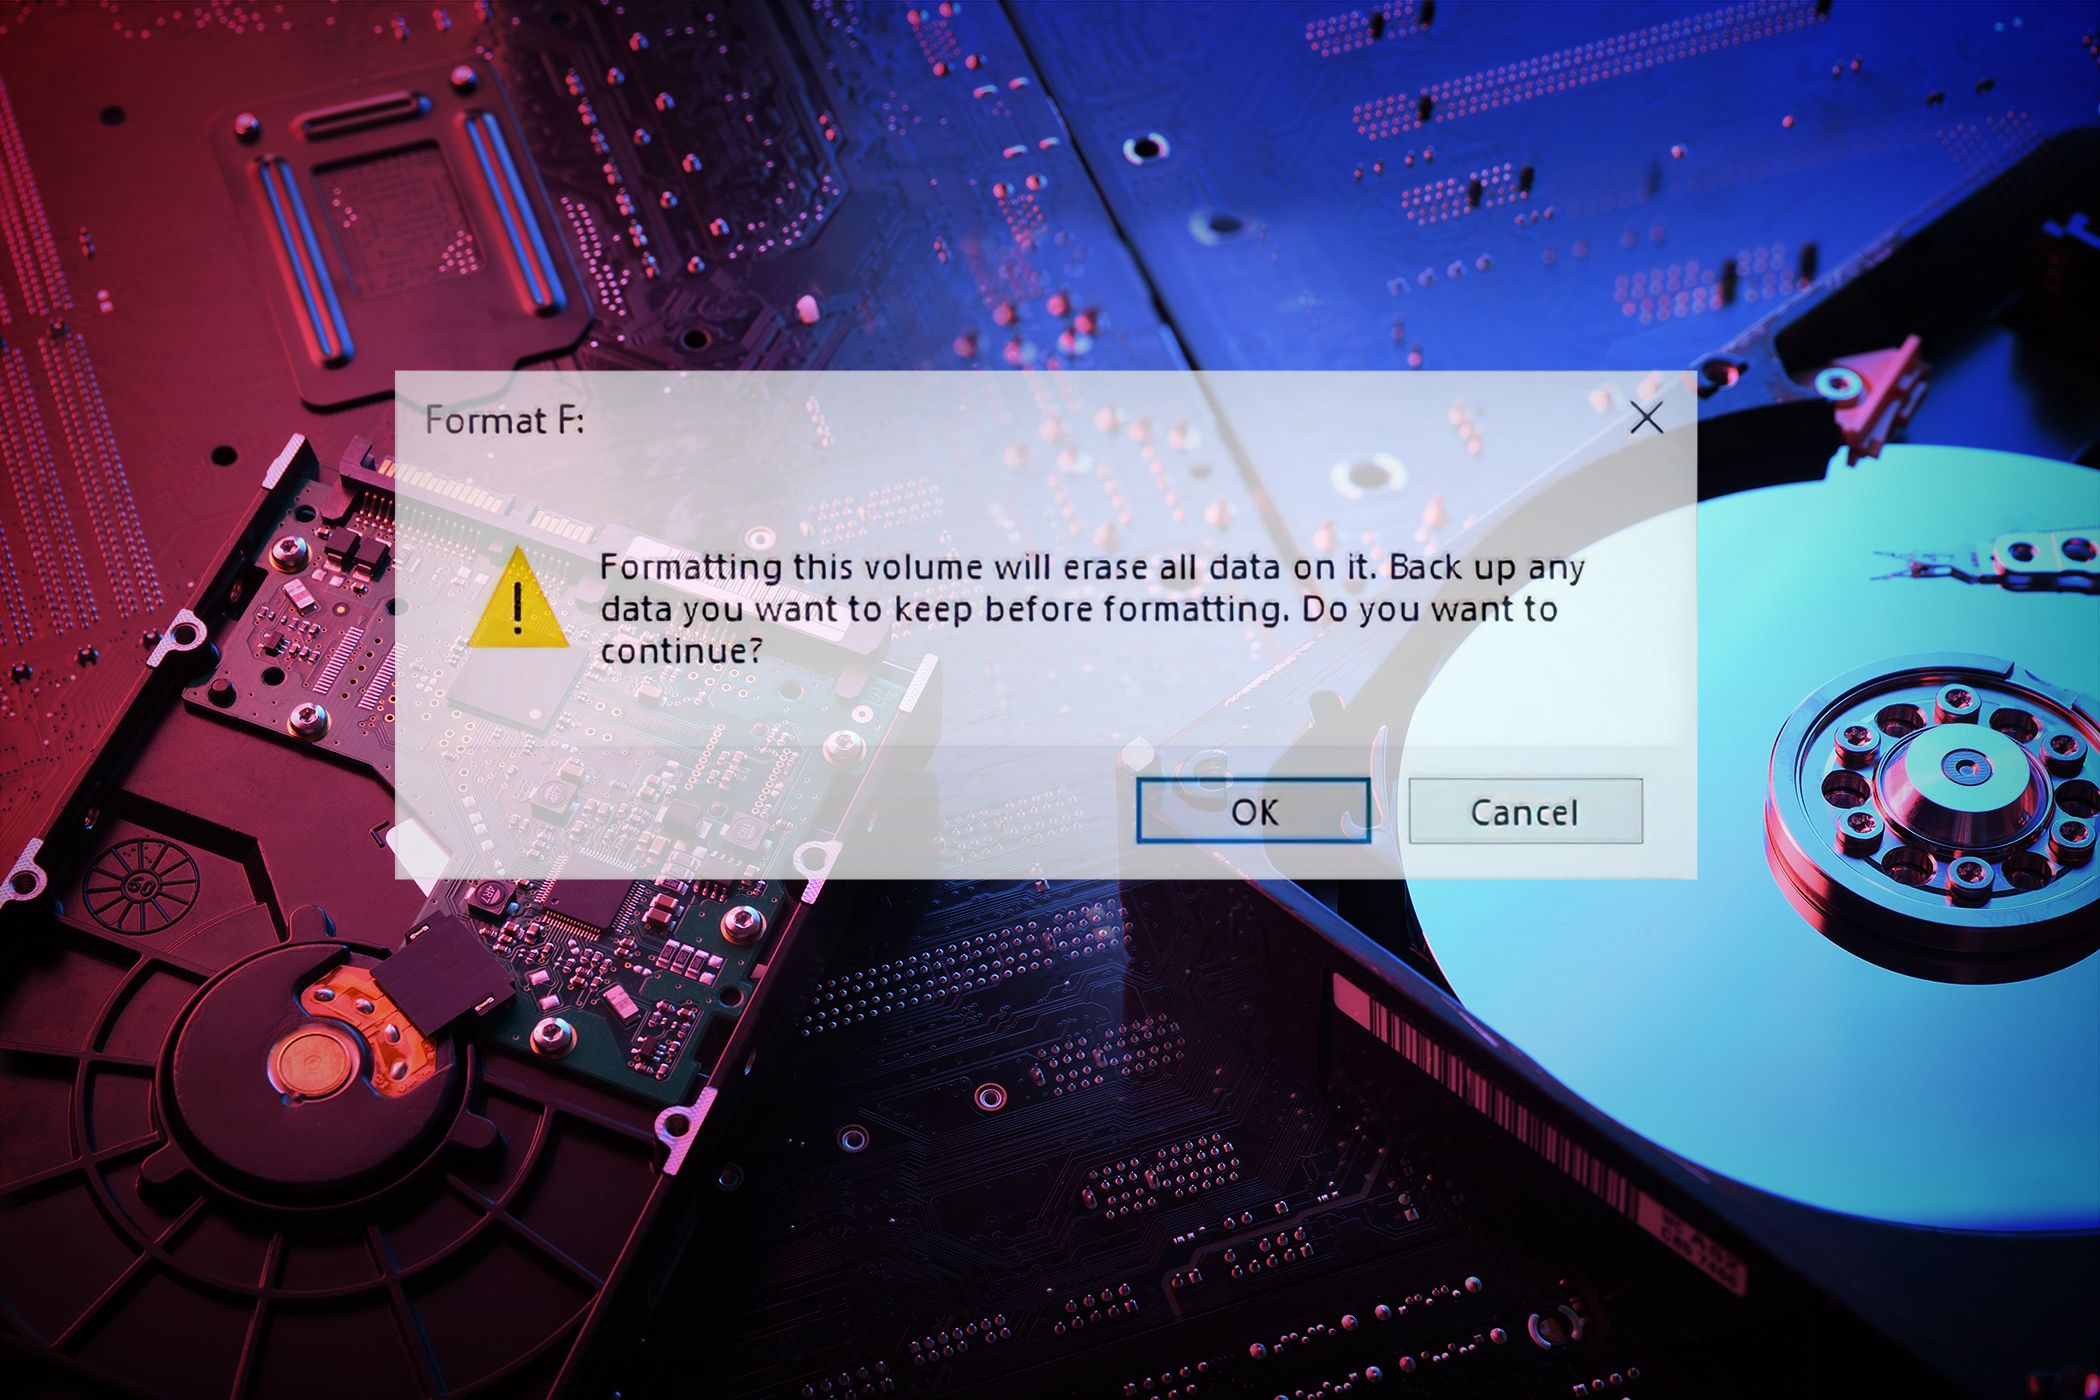 A formatting warning dialog on a computer screen, cautioning that all data will be erased, with a backdrop of hardware.